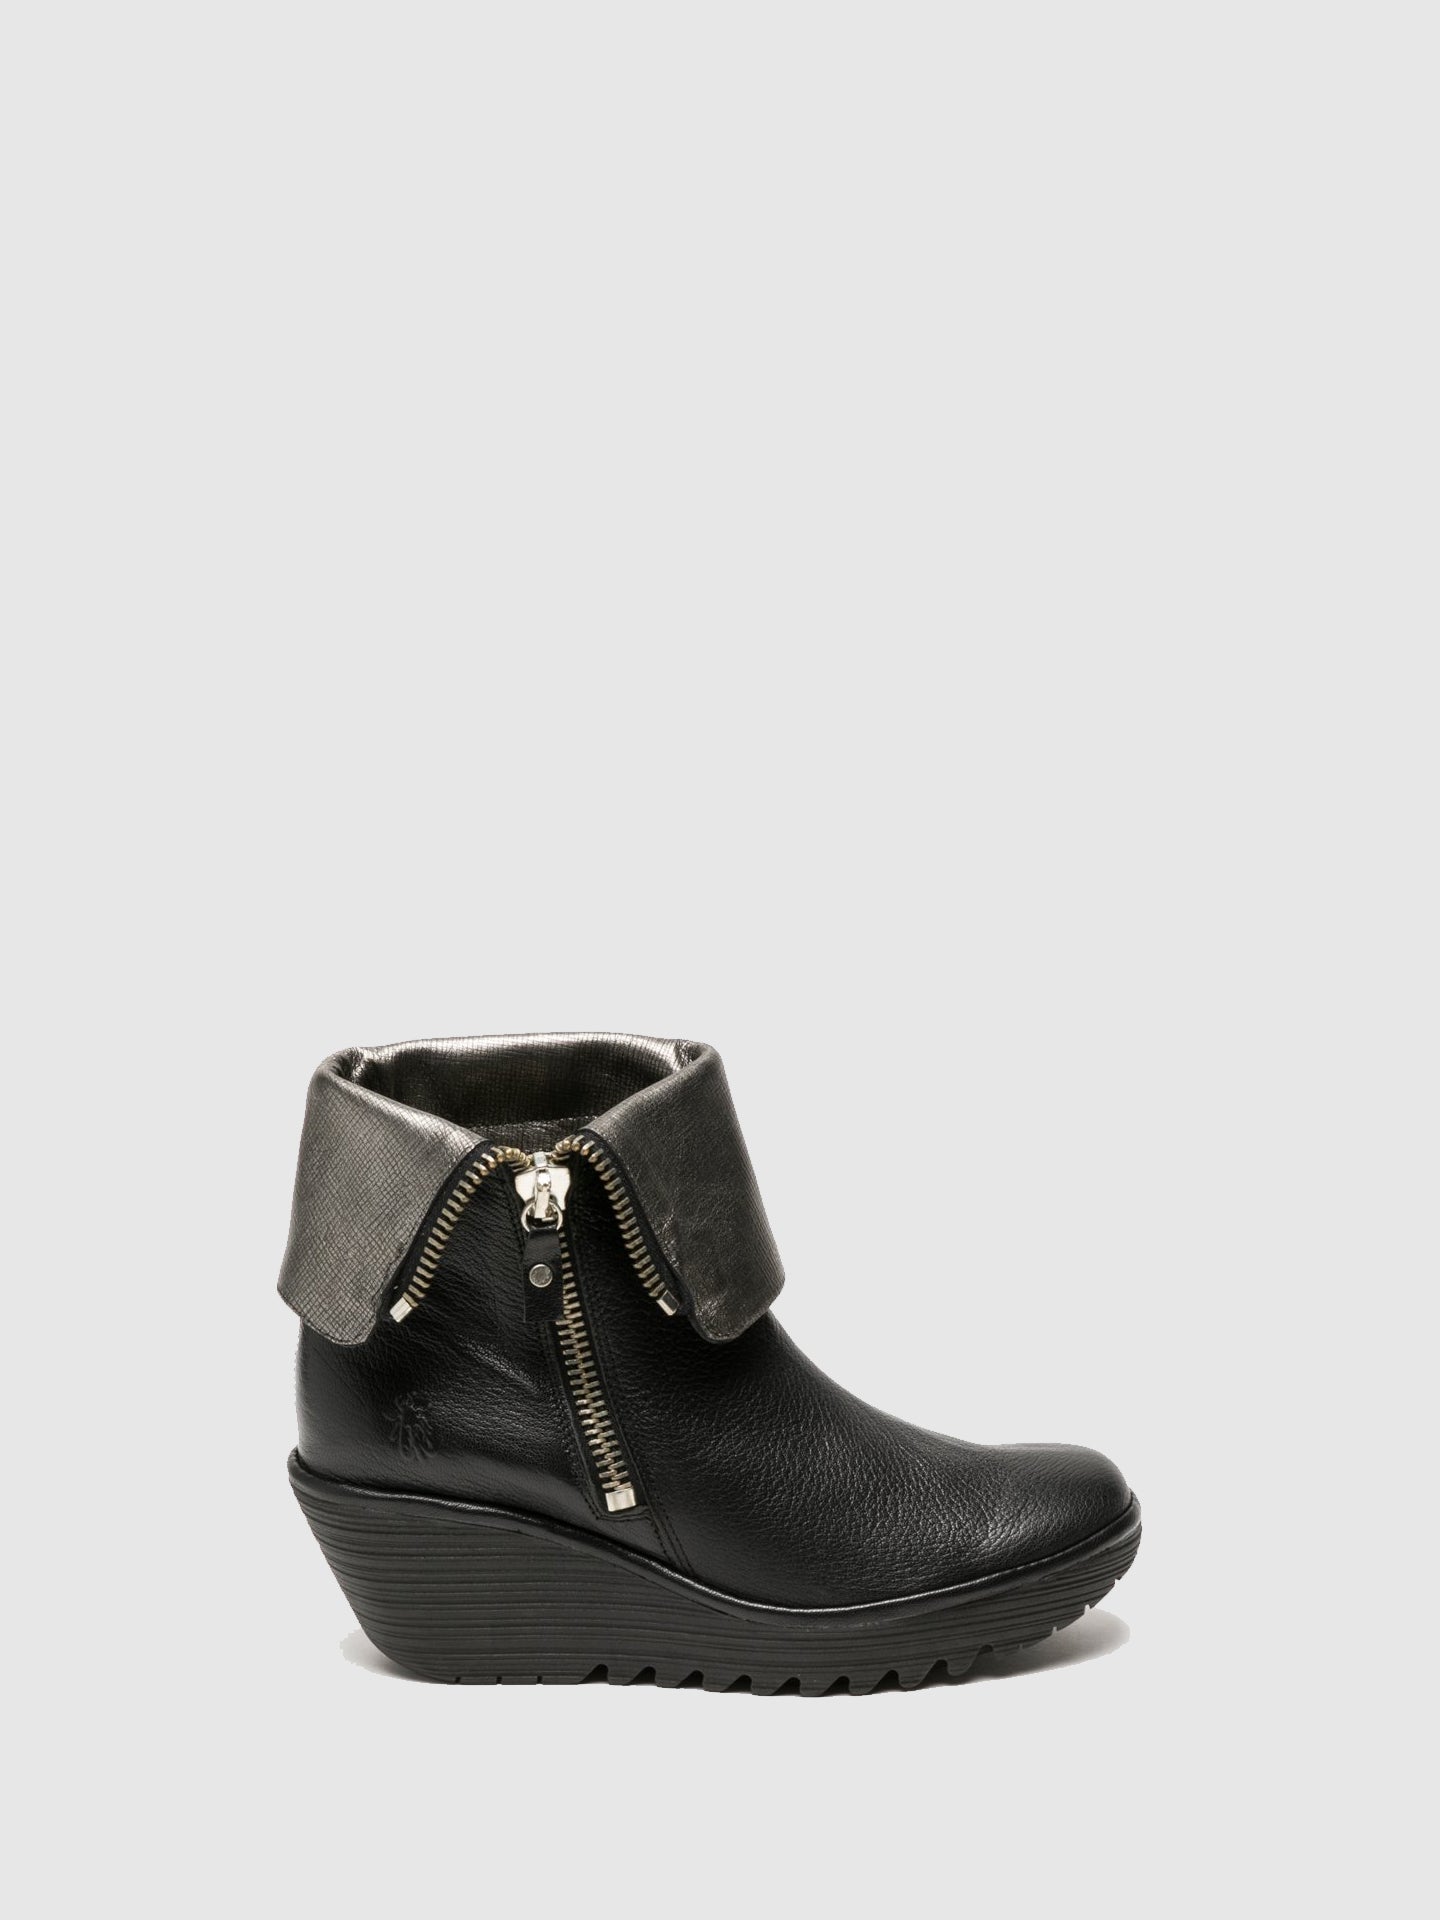 Fly London Coal Black Zip Up Ankle Boots